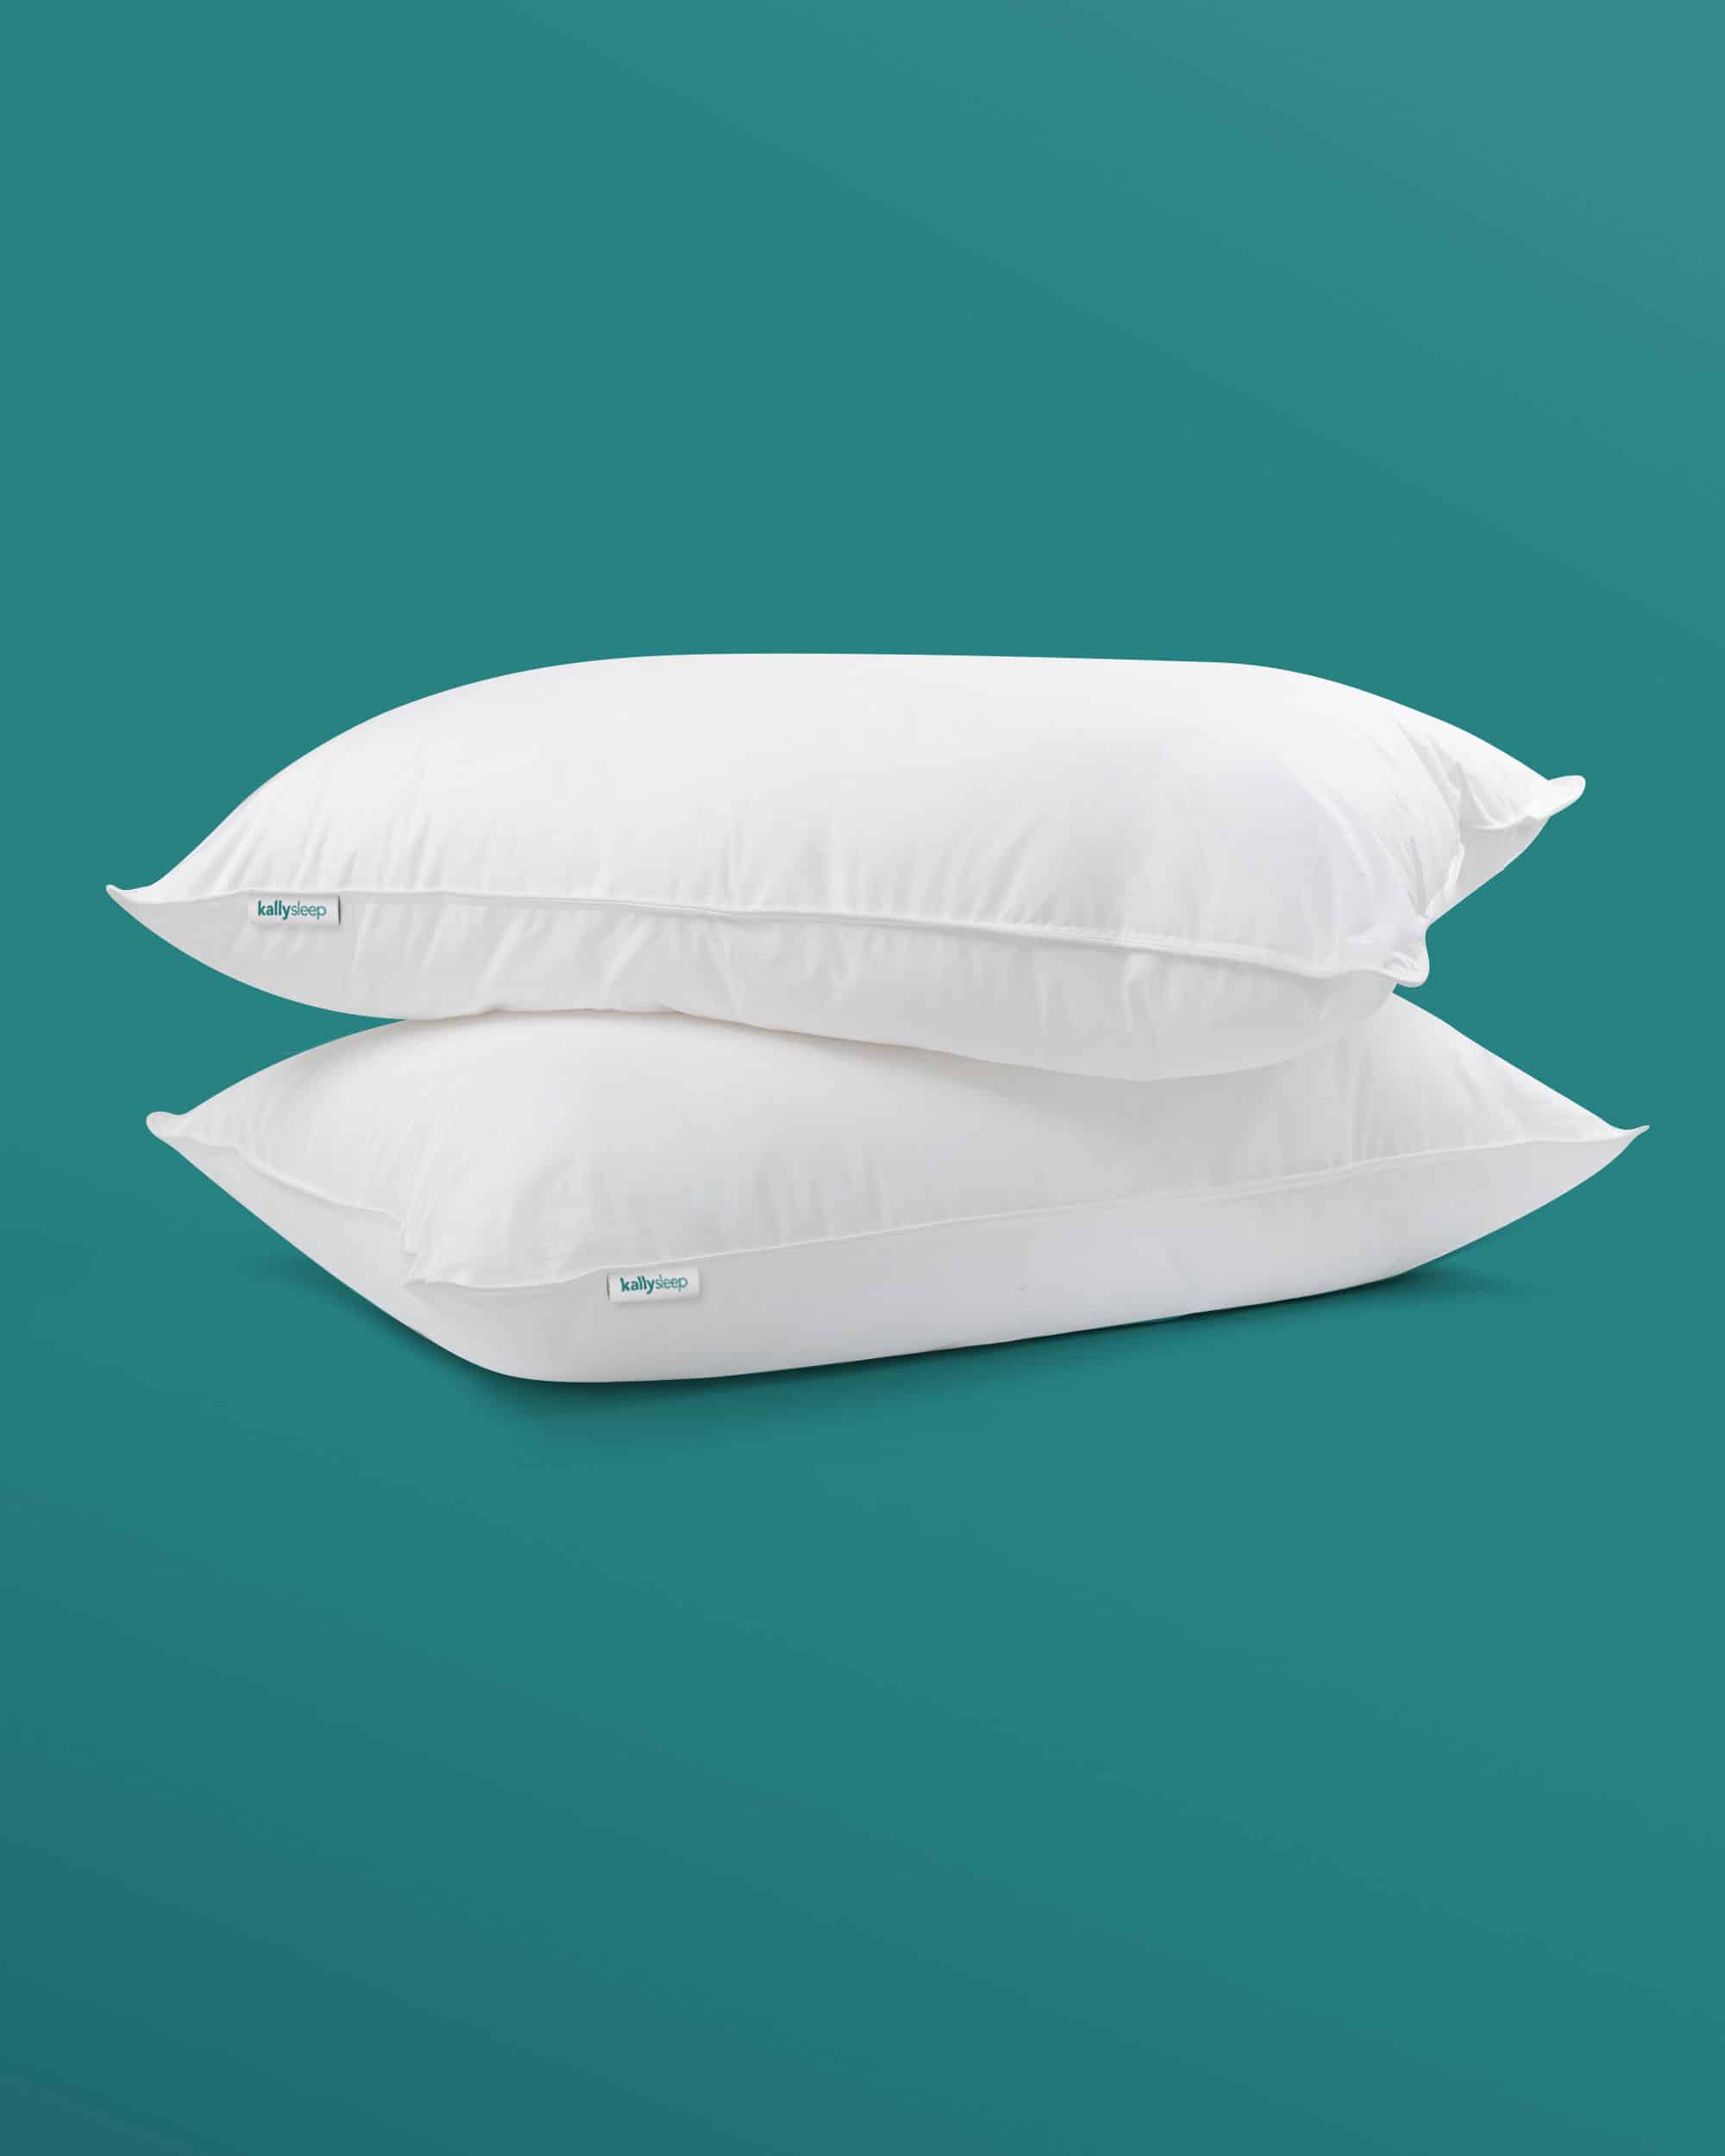 5 Star Hotel Pillows (Twin Pack)